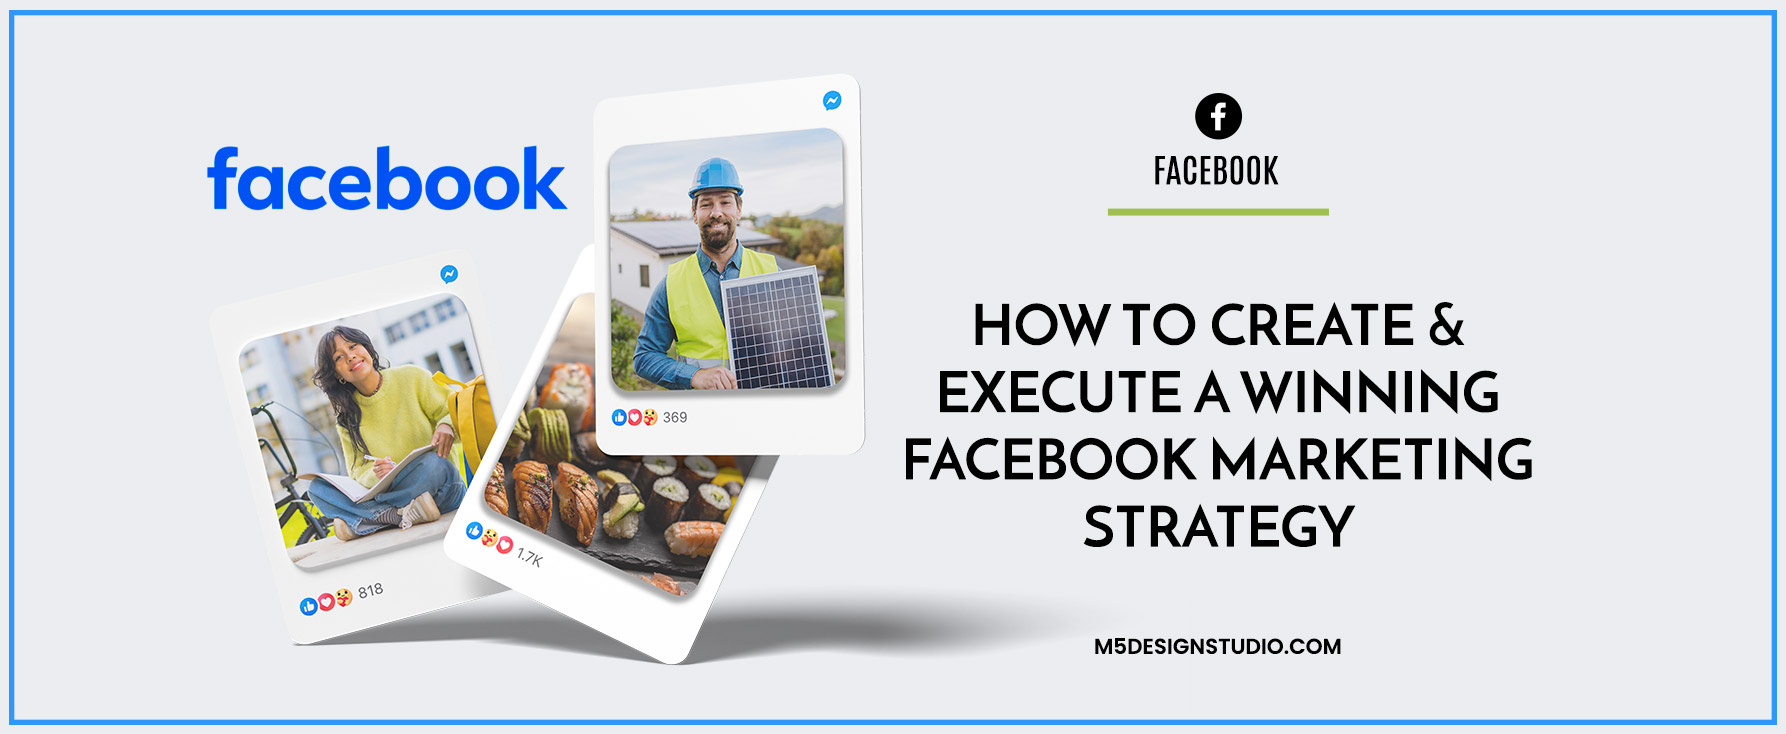 How To Create And Execute A Winning Facebook Marketing Strategy Orlando